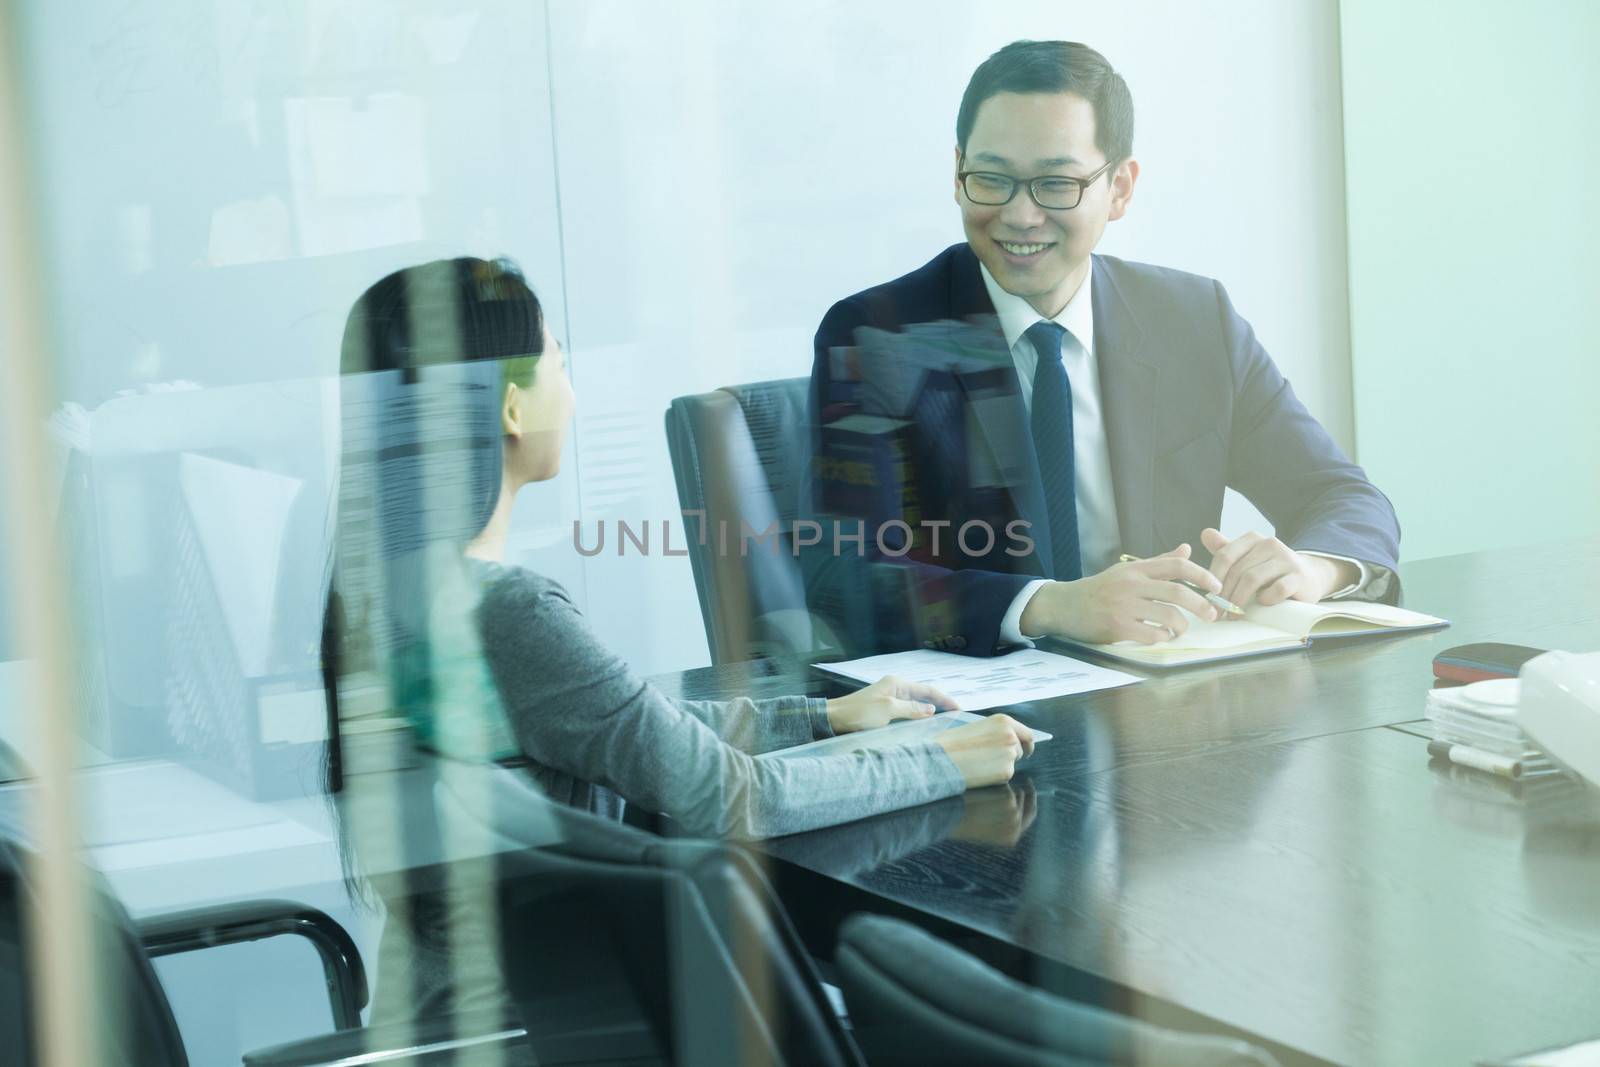 Colleagues Meeting in Conference Room, Shot Through Glass